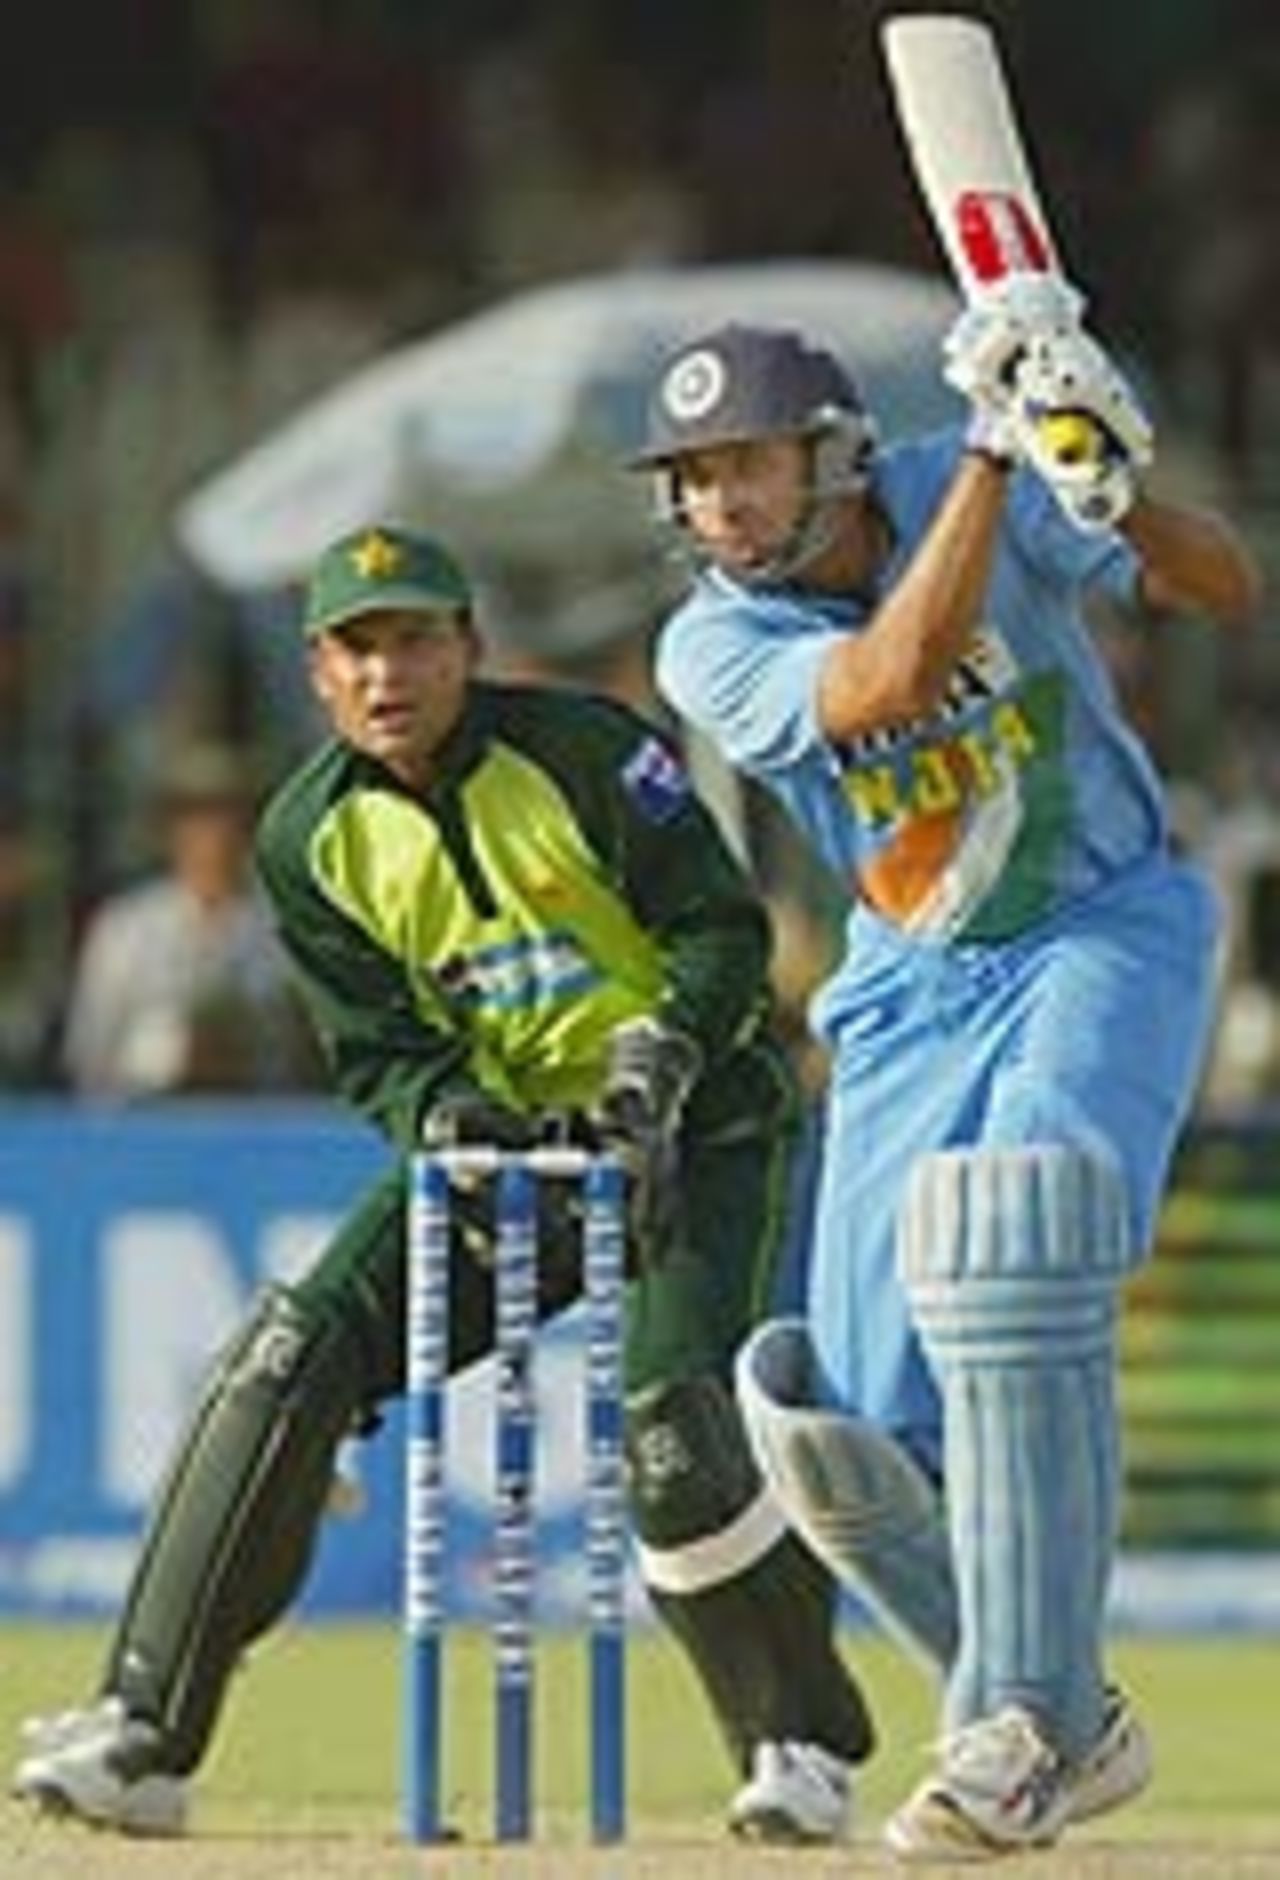 VVS Laxman launches into a cover-drive as Moin Khan watches, Pakistan v India, 5th ODI, Lahore, March 24, 2004